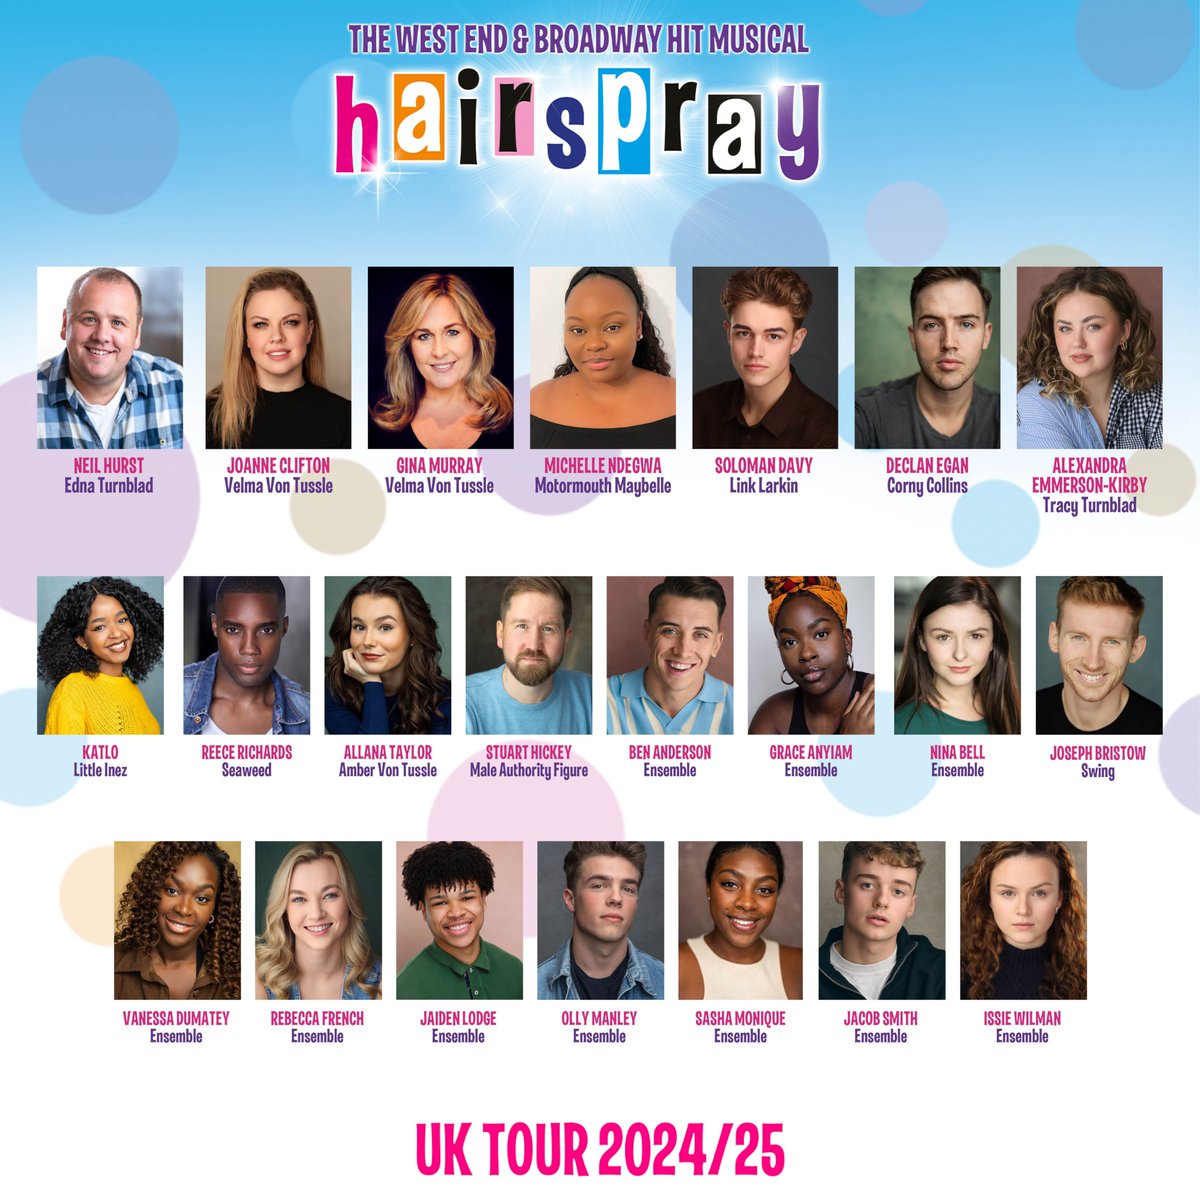 HAIRSPRAY 2024/5 UK AND IRELAND TOUR - NEWS The 2024/25 UK and Ireland tour of Hairspray has announced initial casting and the tour dates for the smash hit musical. Read everything here: londontheatrereviews.co.uk/post.cfm?p=194…